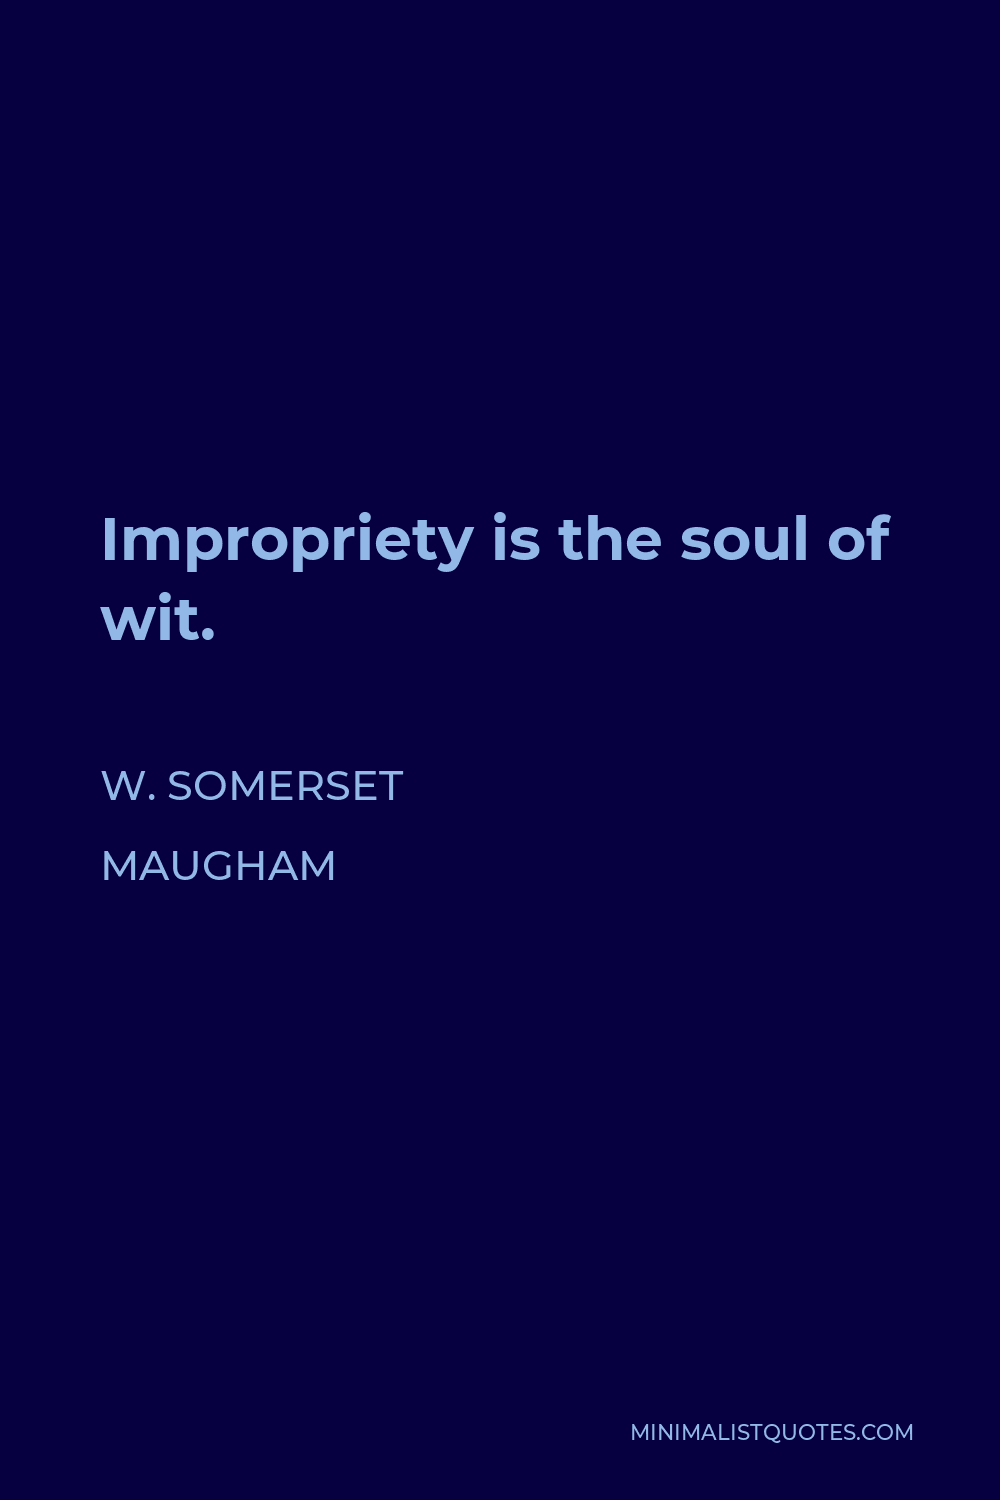 W. Somerset Maugham Quote - Impropriety is the soul of wit.